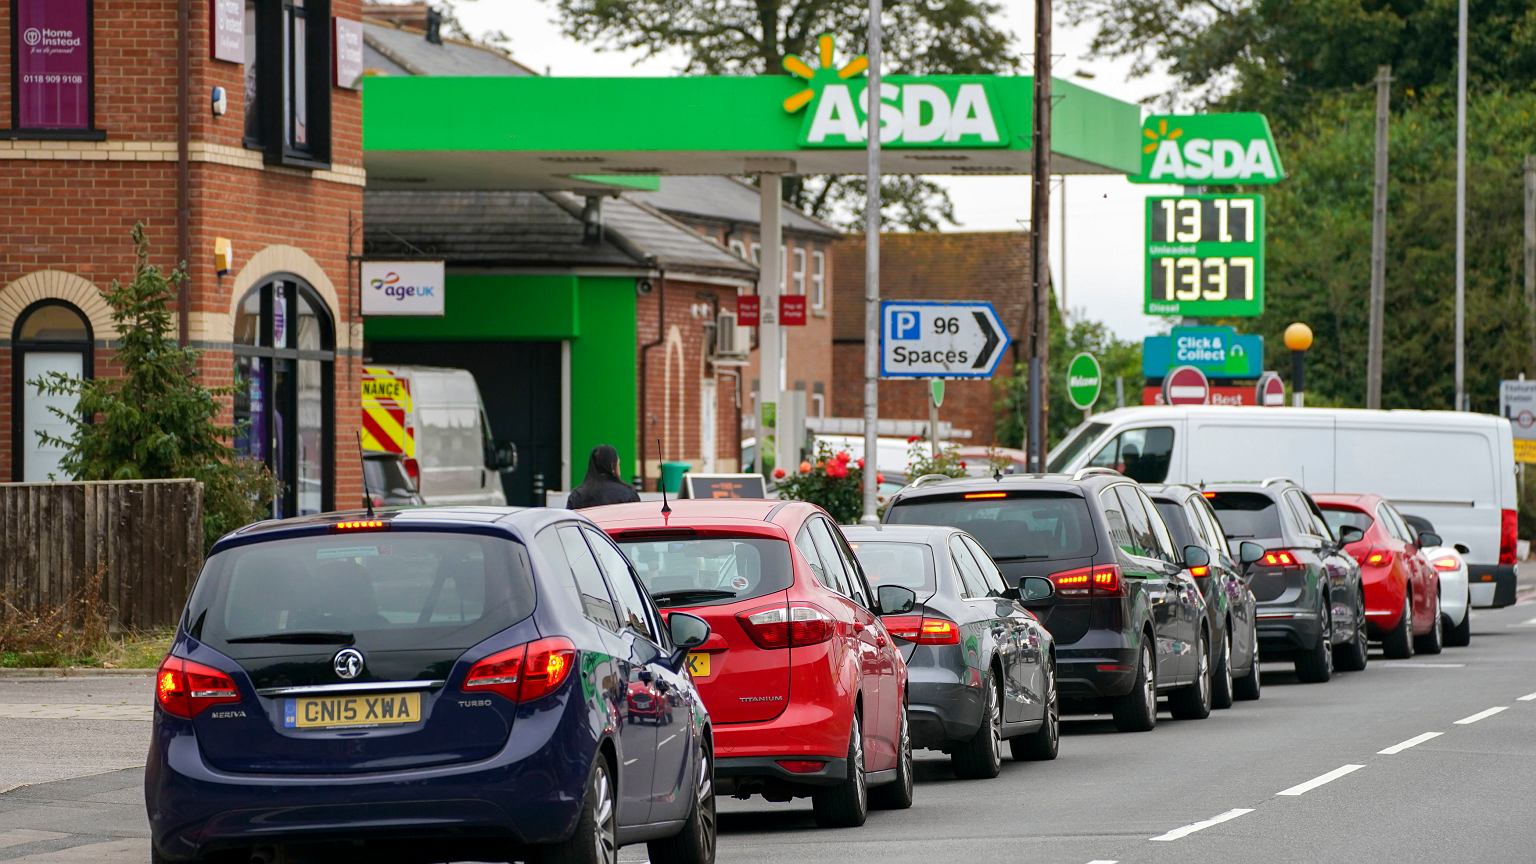 Fuel shortages at stations in Great Britain